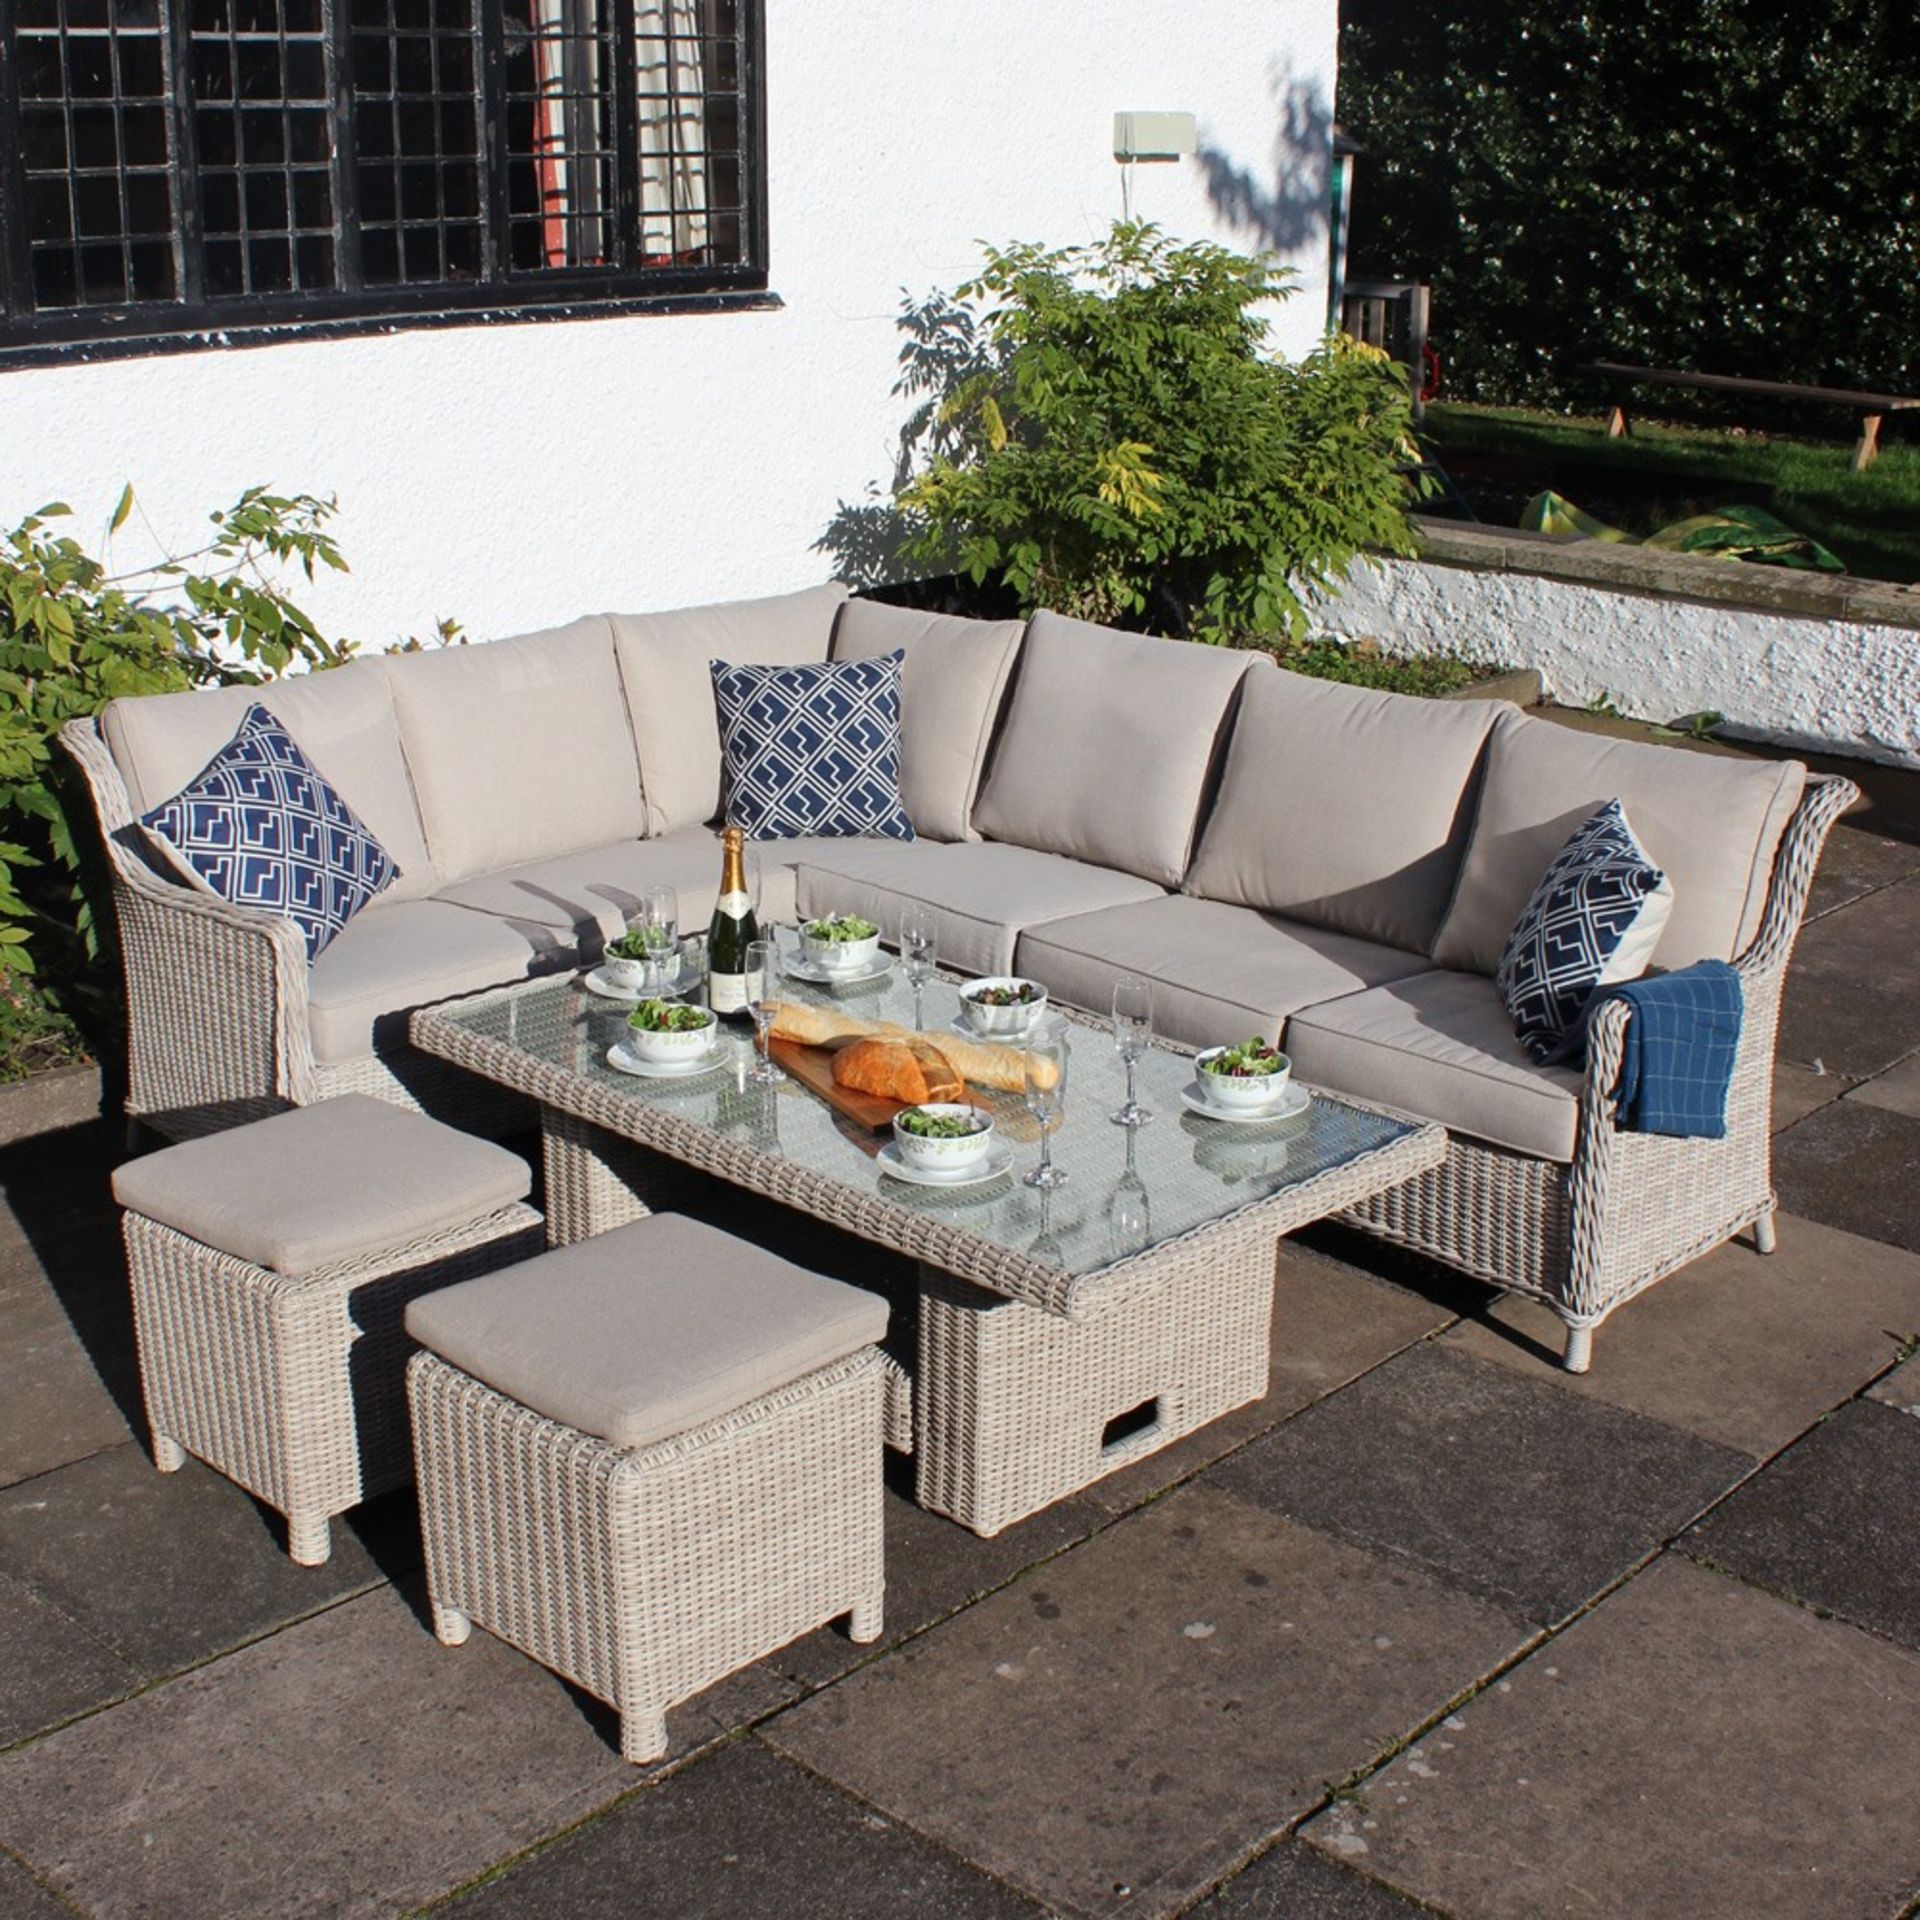 V Brand New Luxury Rattan Corner Dining Set With Adjustable Table - Includes Two Stools & Weather - Image 2 of 2